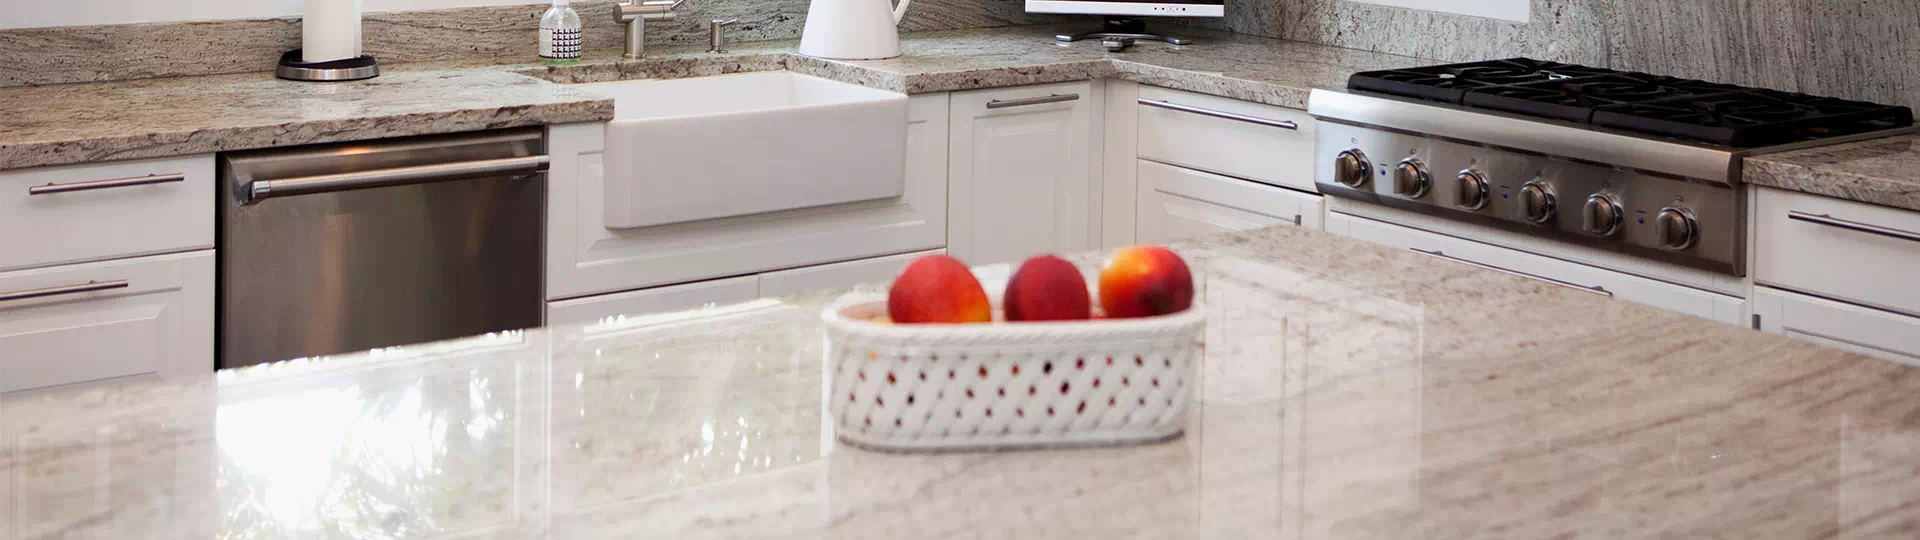 How To Clean Kitchen Countertops, How To Polish Silestone Countertops